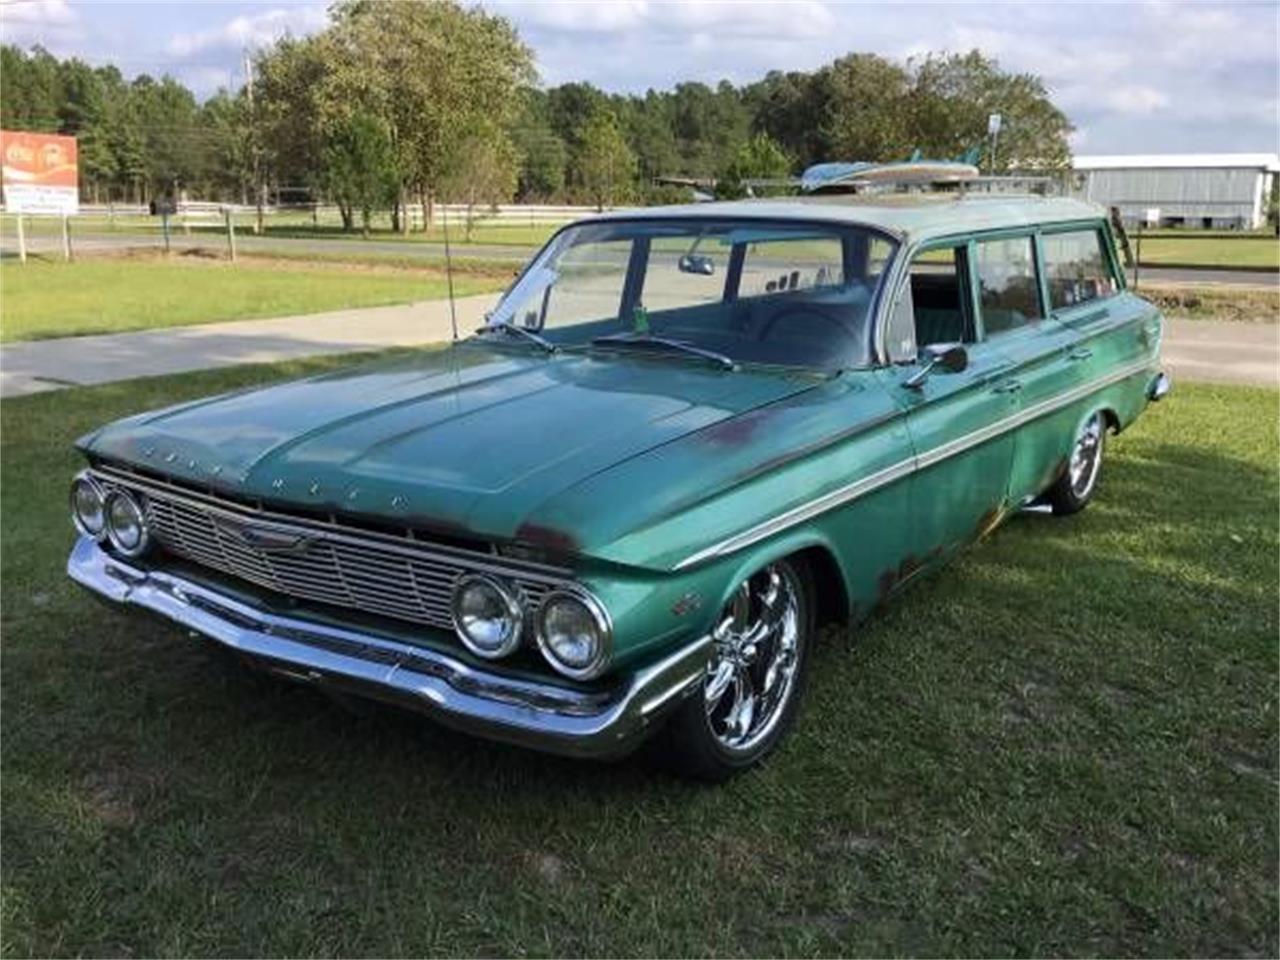 For Sale: 1961 Chevrolet Station Wagon in Cadillac, Michigan.